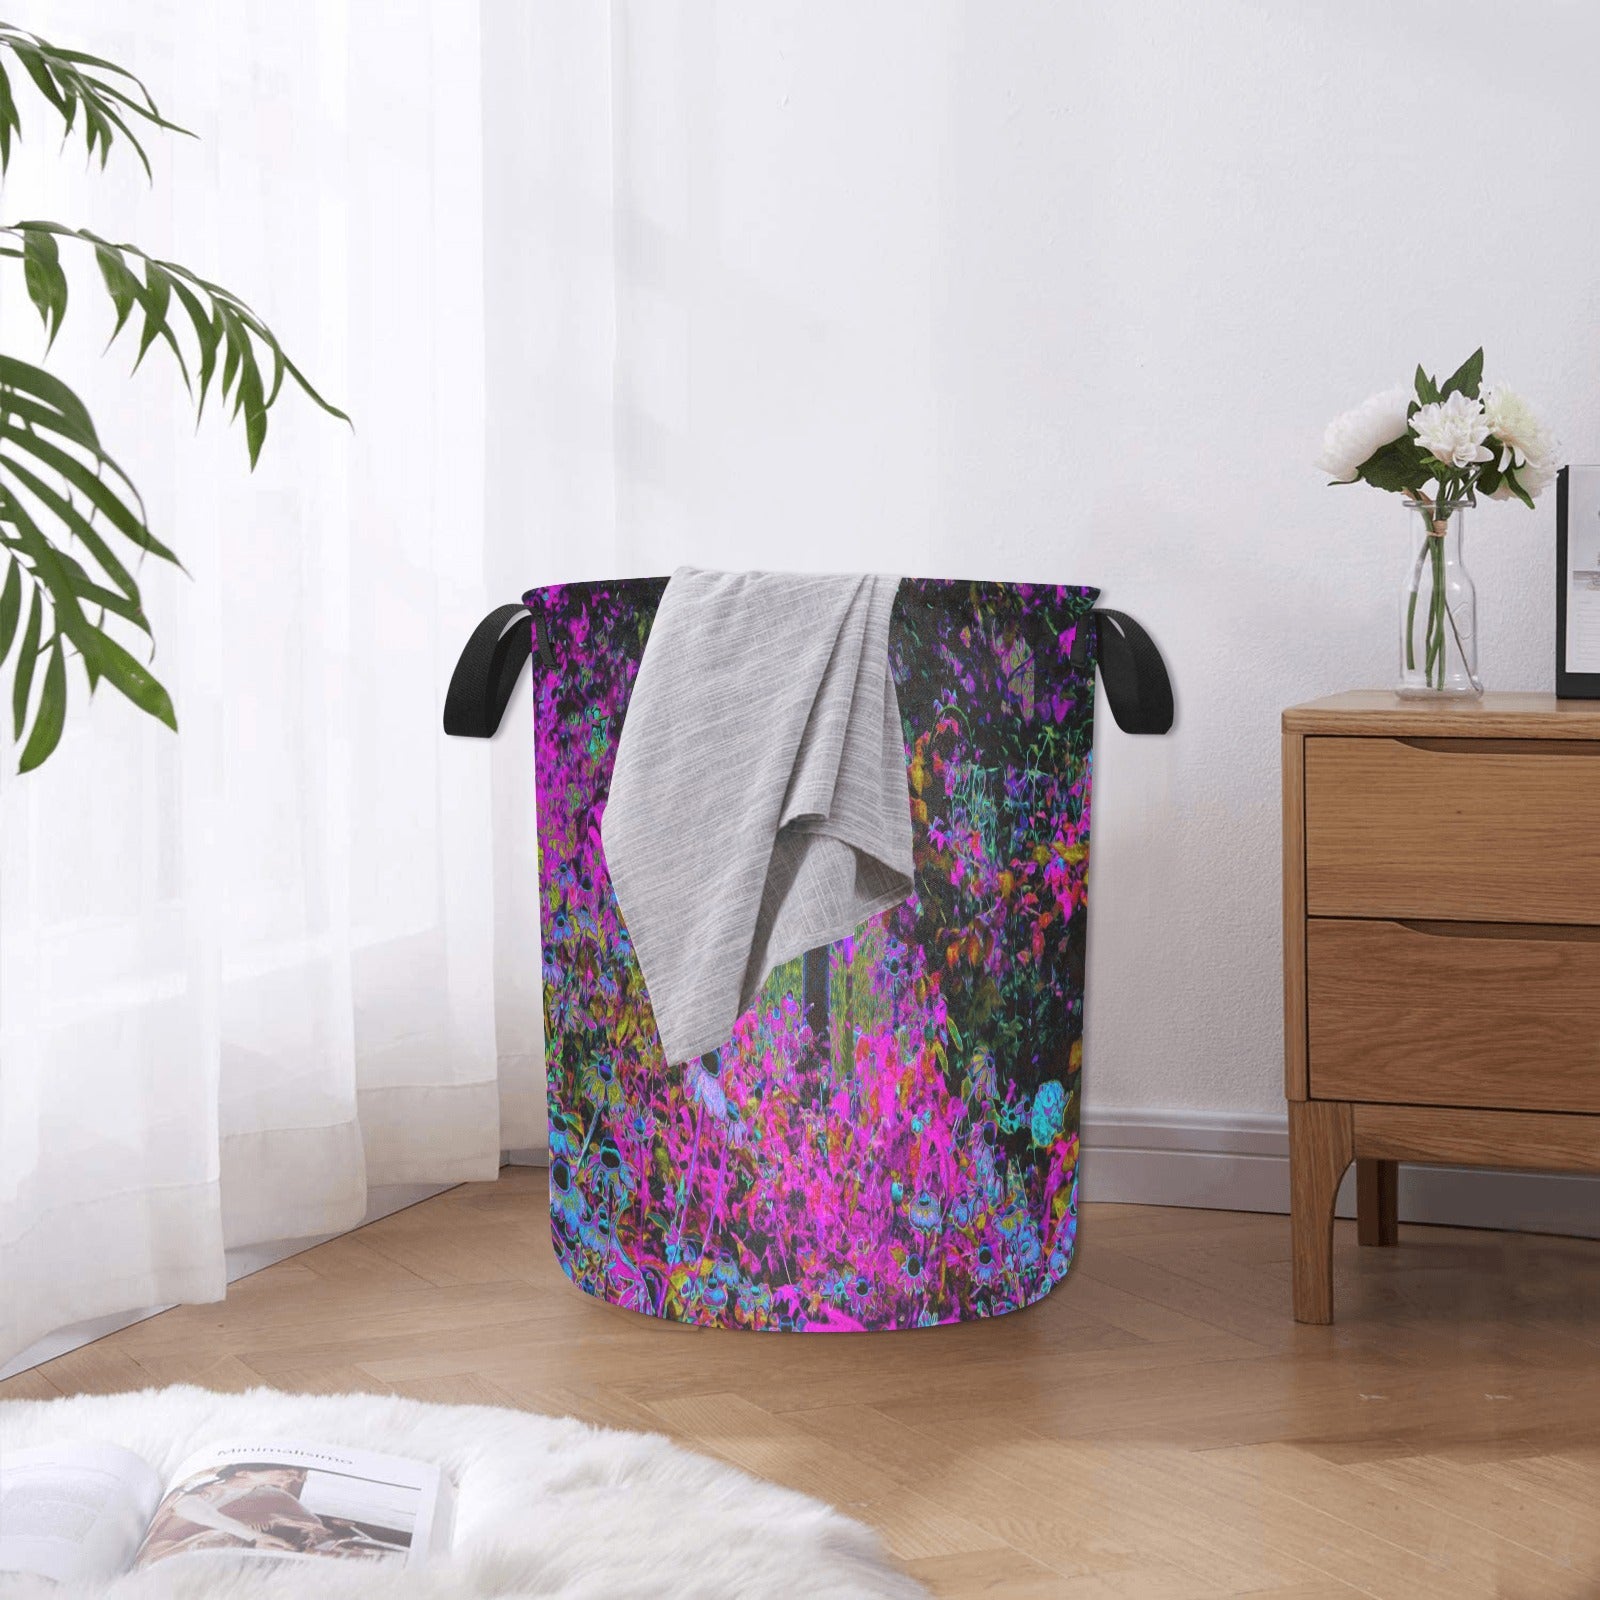 Fabric Laundry Basket with Handles, Psychedelic Hot Pink and Black Garden Sunrise